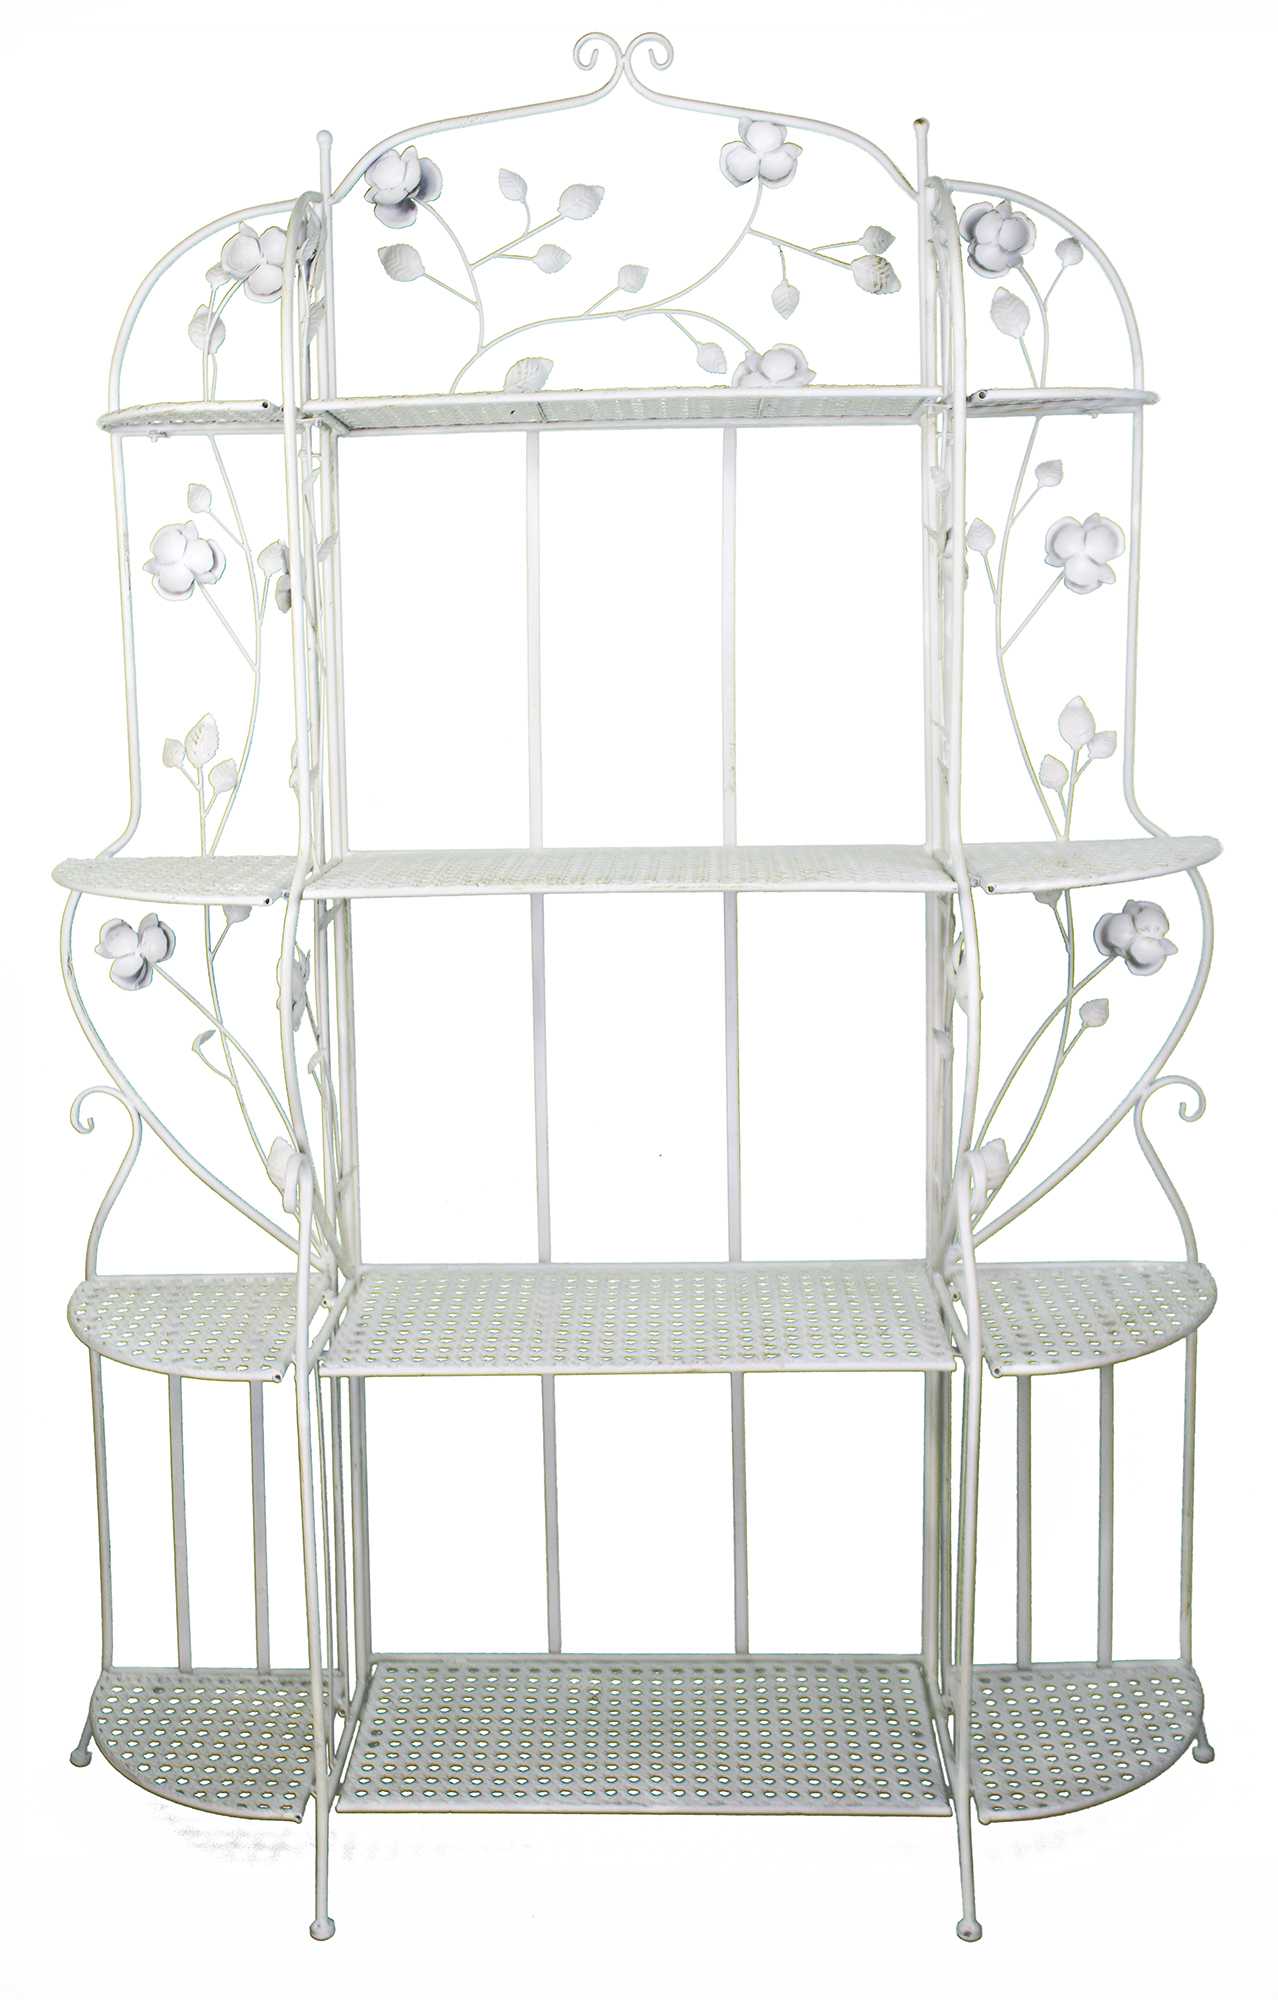 25" X 5" X 68" Antique White Steel Antique White Bakers Rack with Shelves